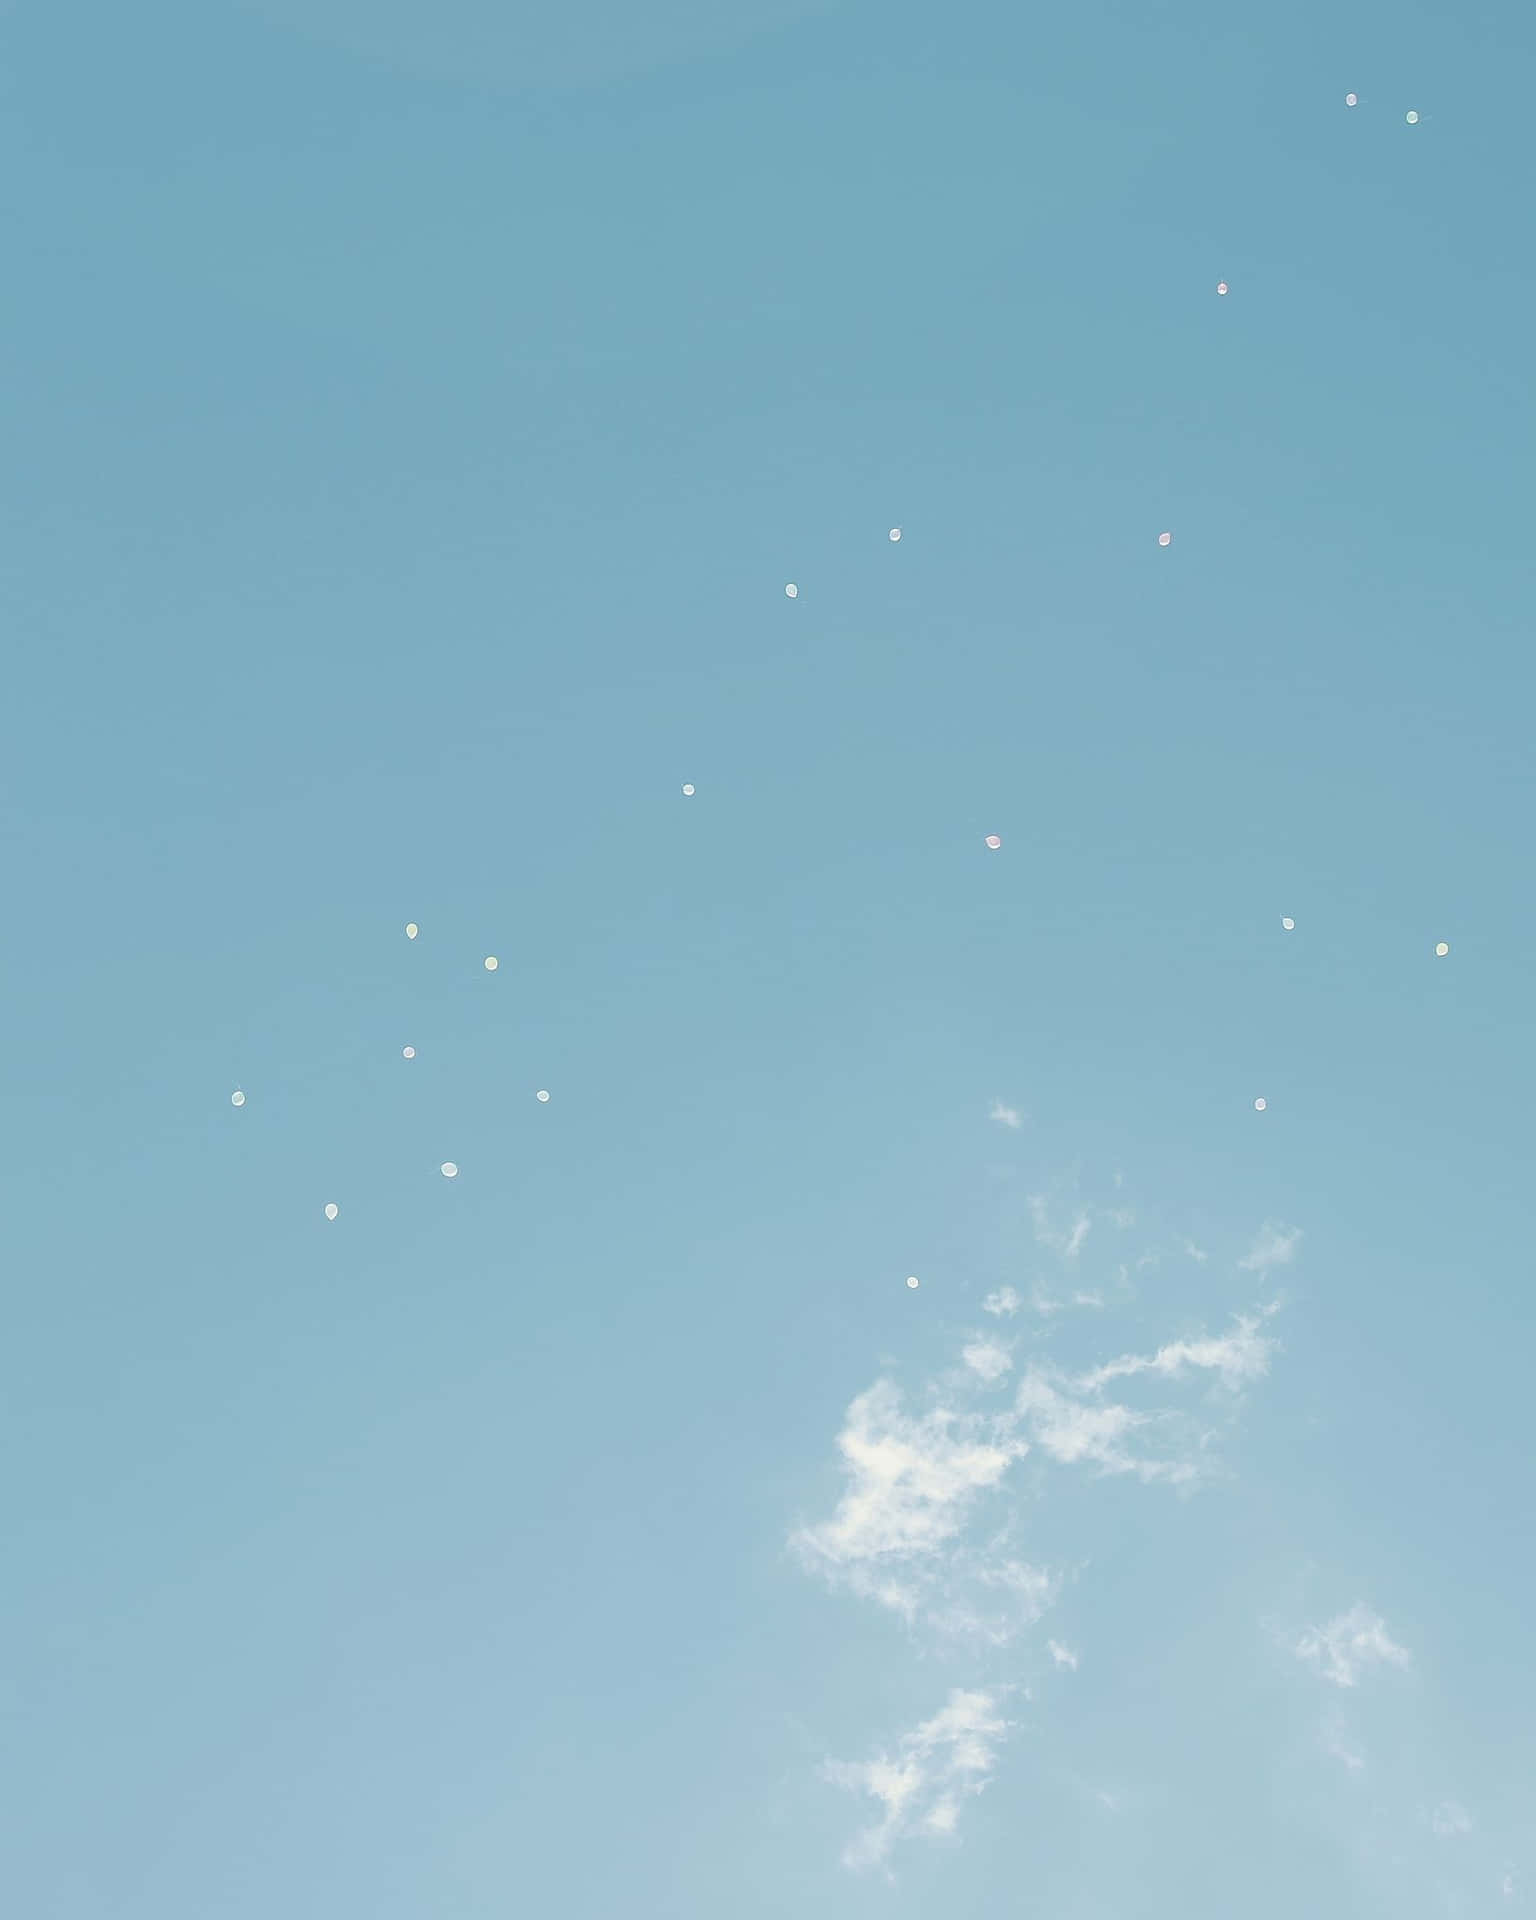 Cloud And White Dots Aesthetic Light Blue Wallpaper